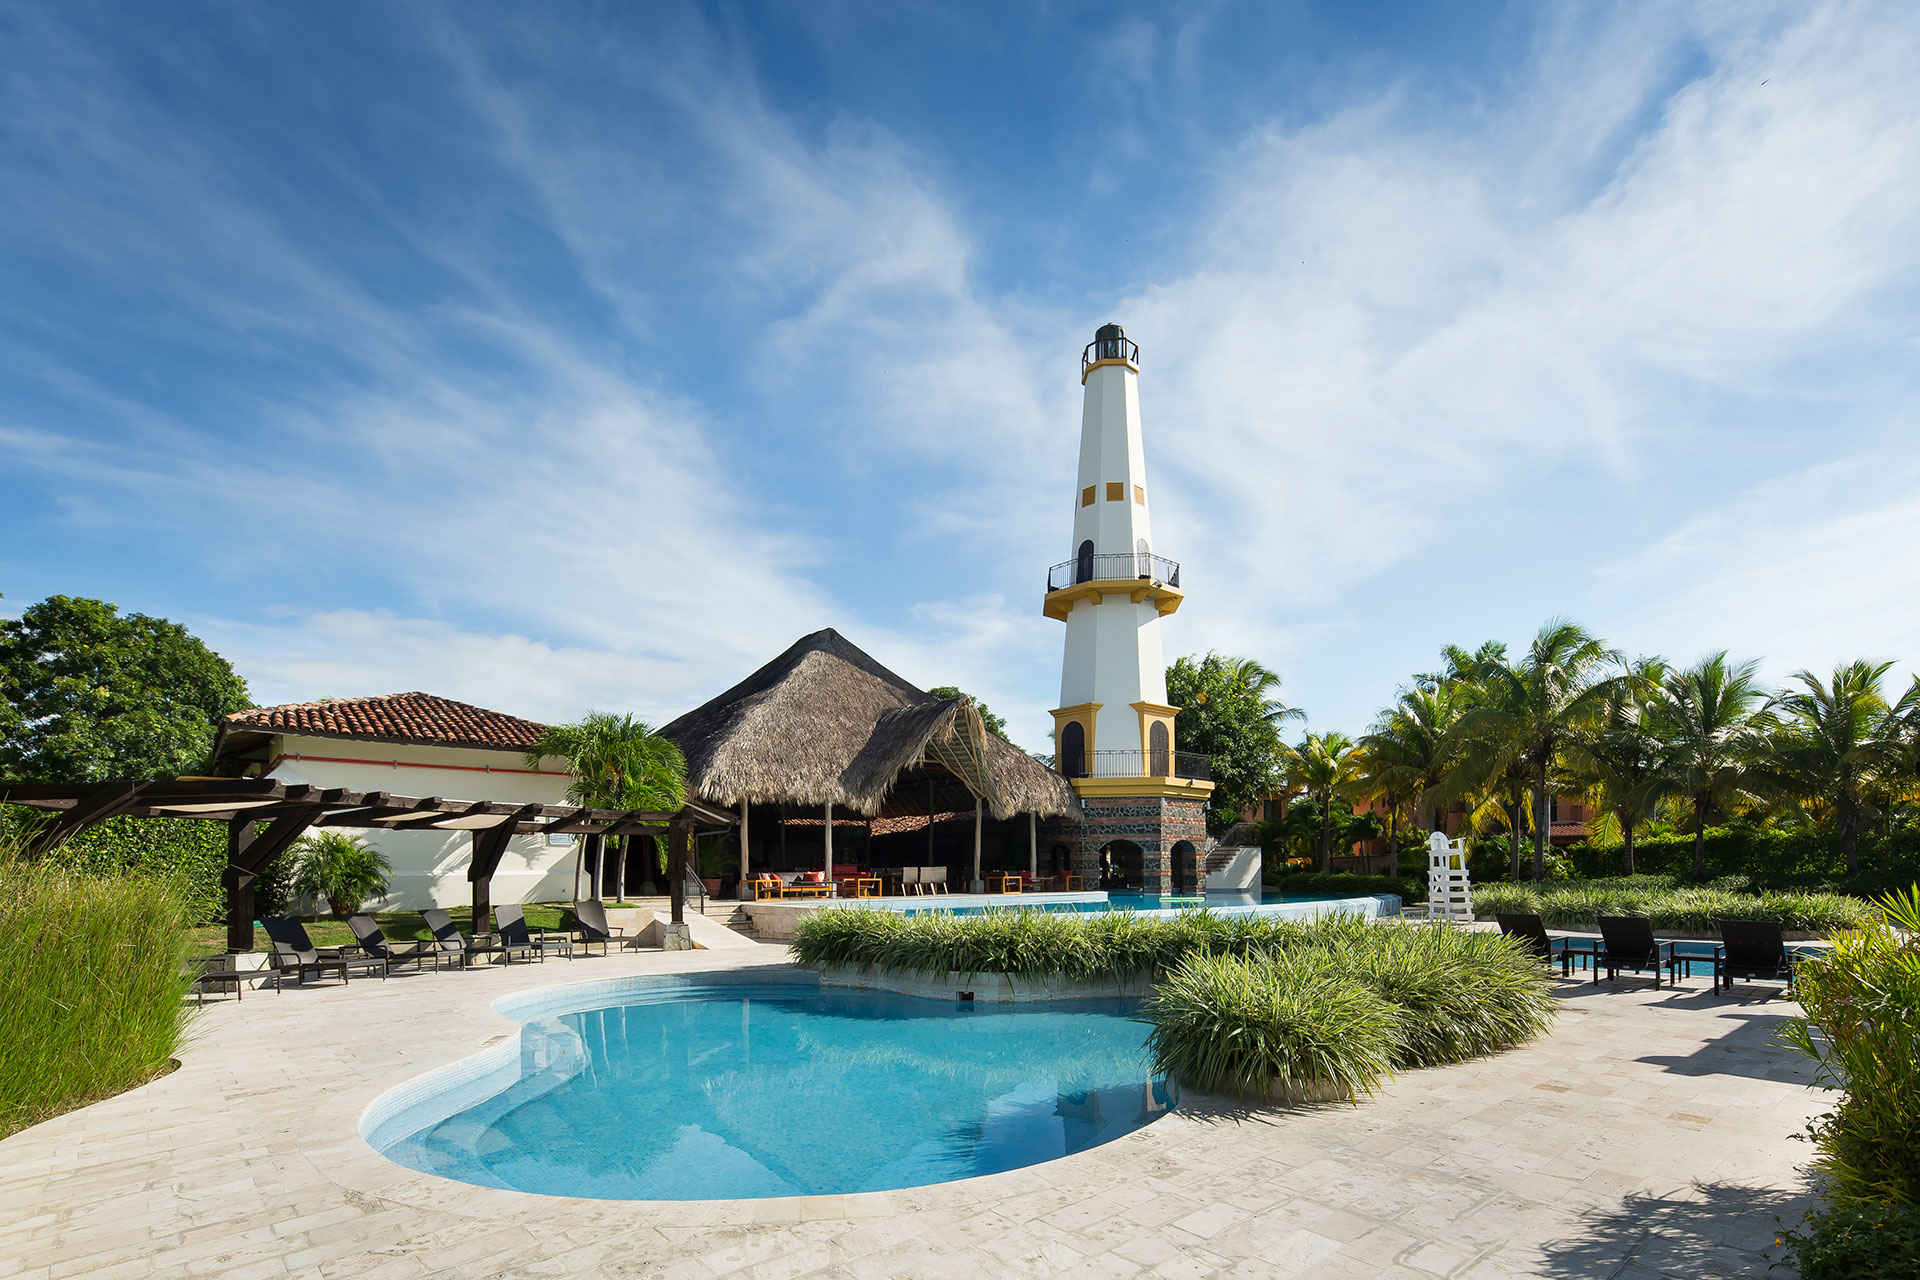  Buenaventura Golf and Beach Resort Pool with lighthouse feature